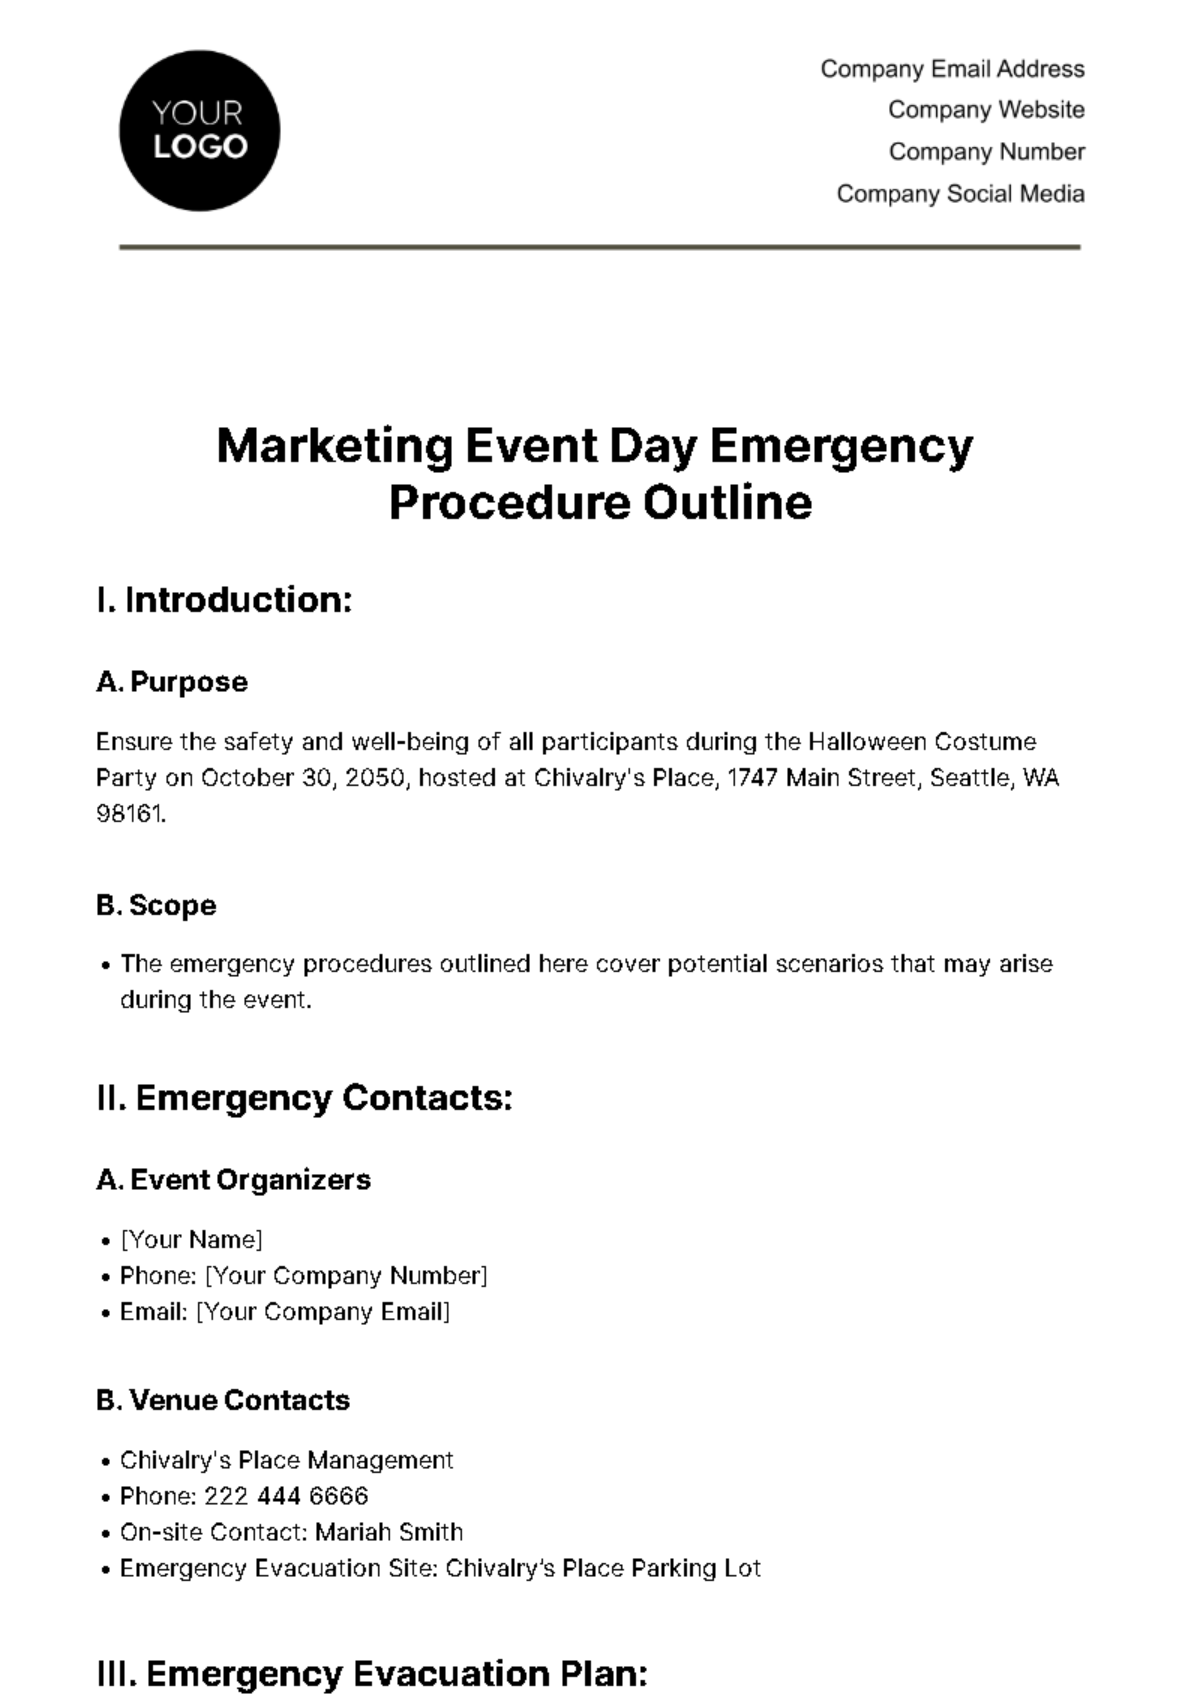 Free Marketing Event Day Emergency Procedure Outline Template